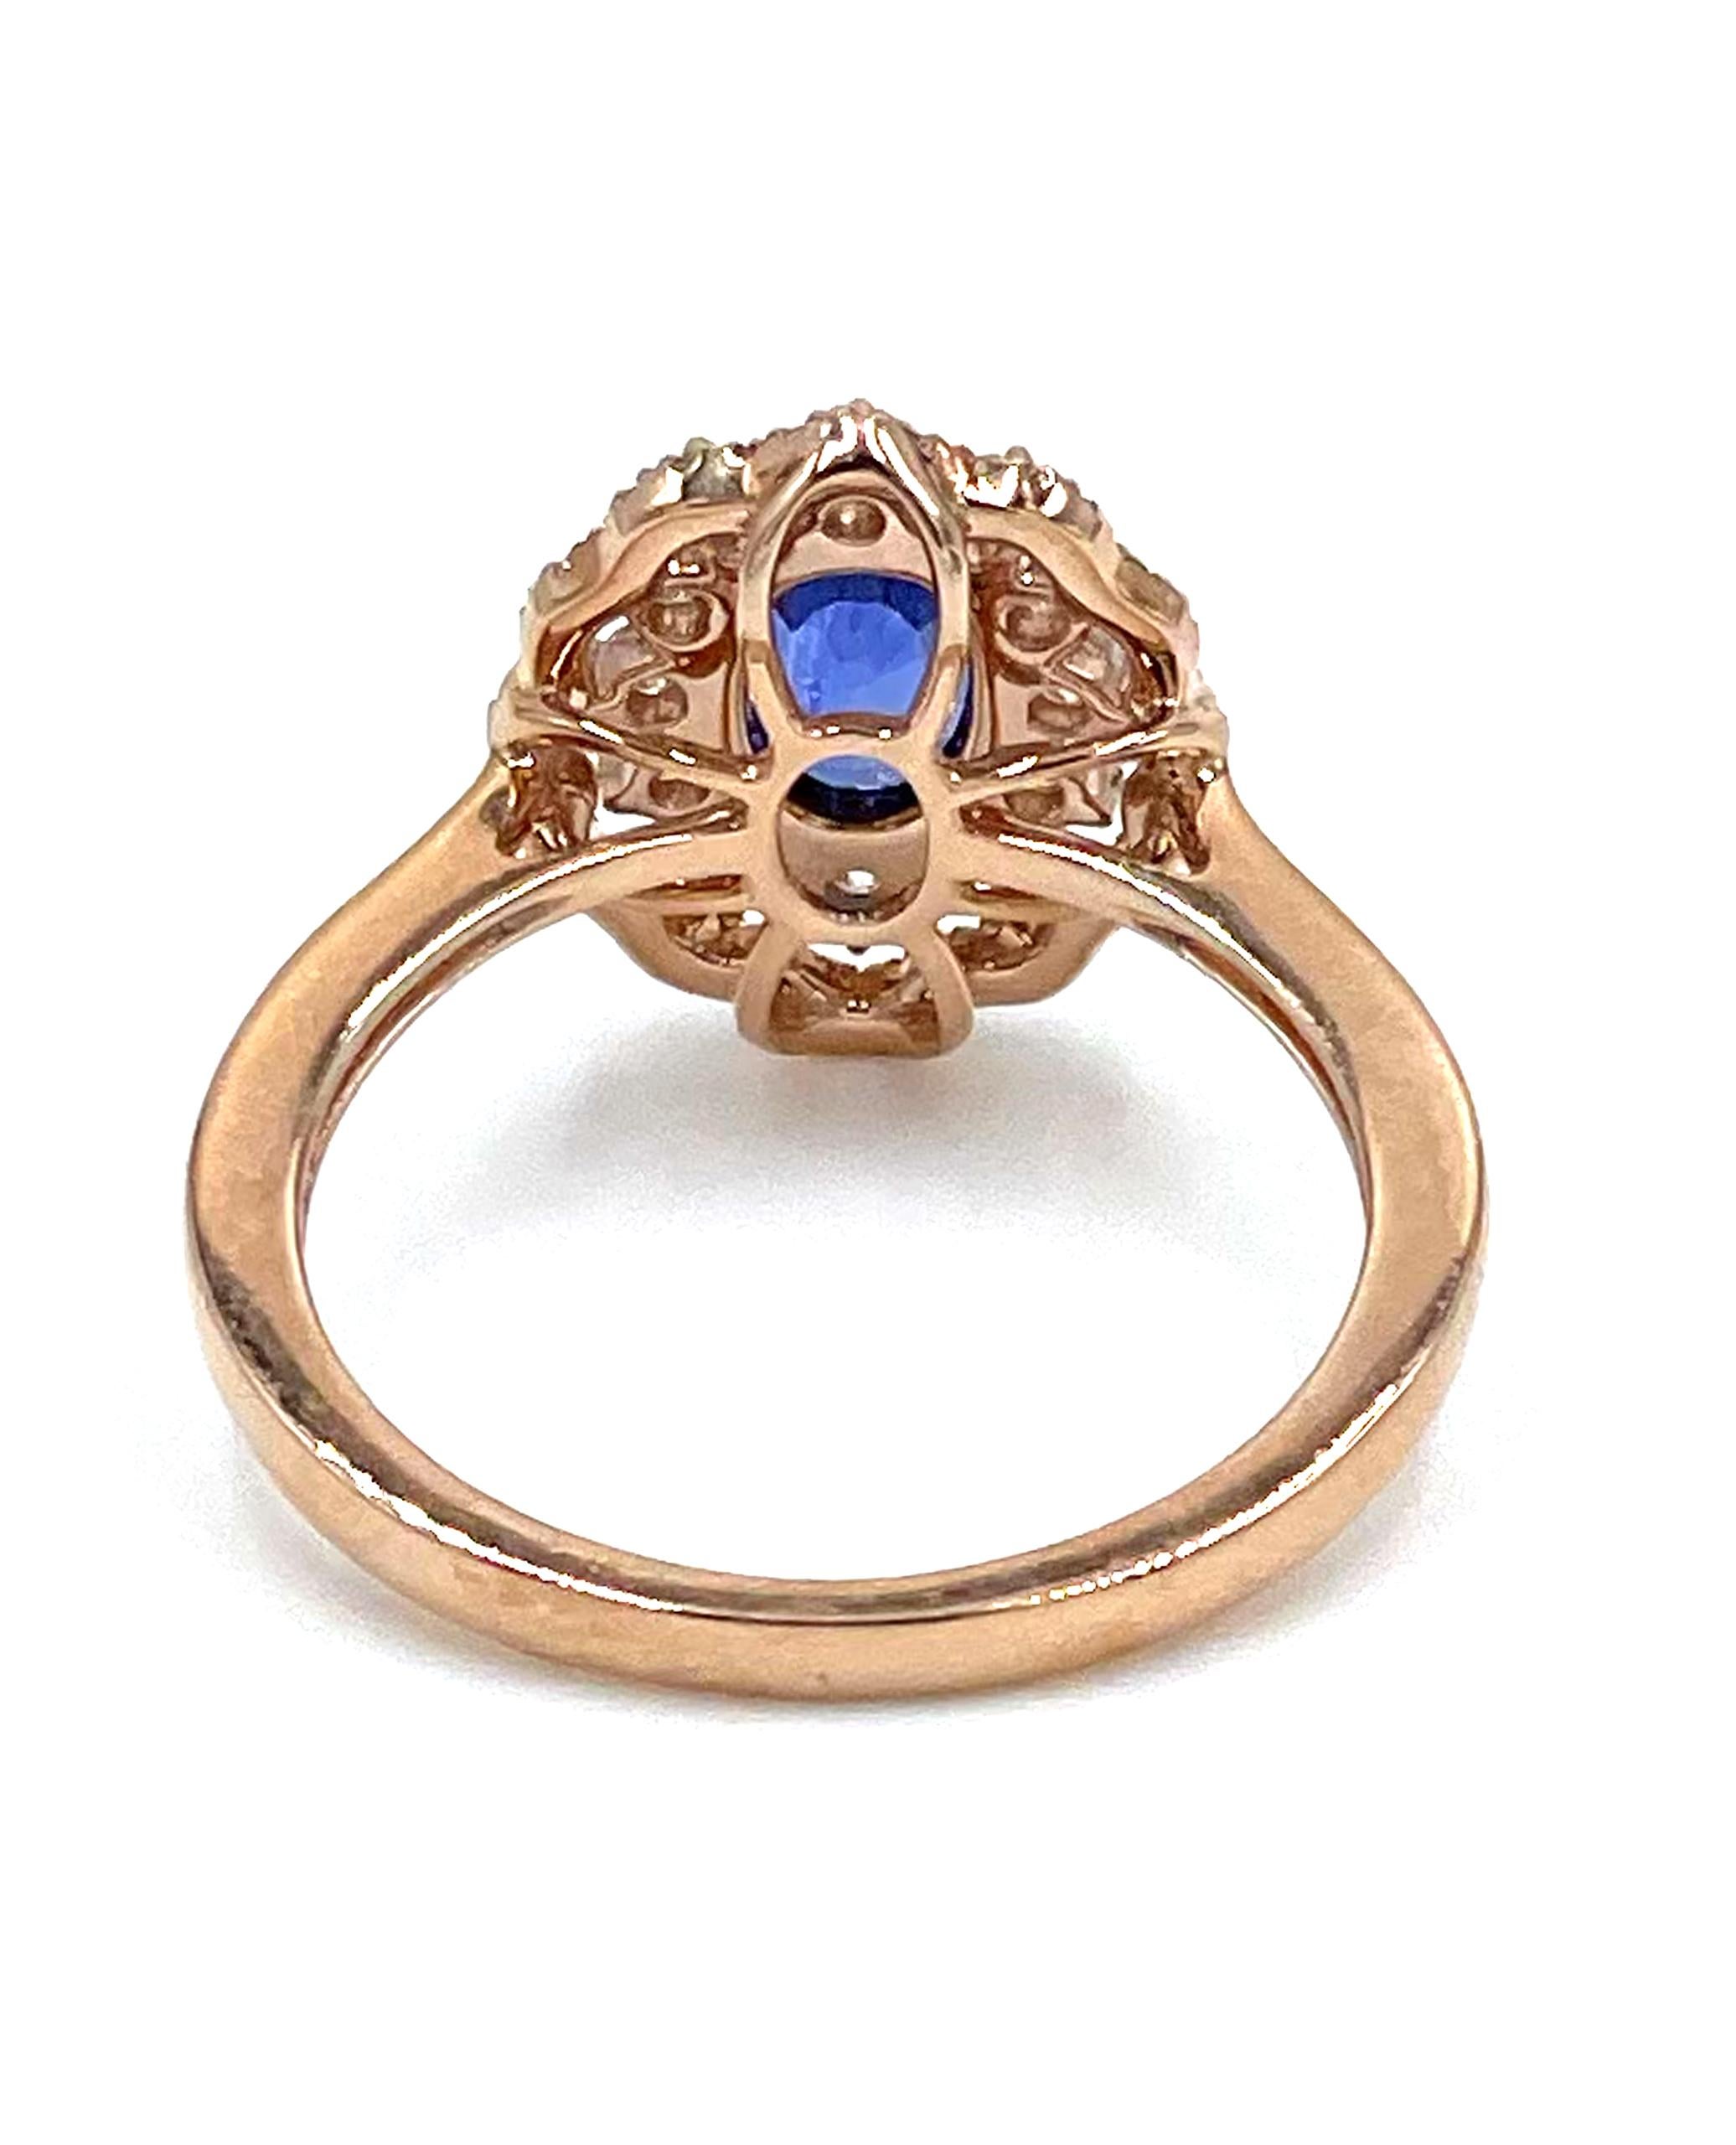 Oval Cut Zeghani ZR2012 14K Rose Gold Diamond Cocktail Ring - Blue Sapphire and Diamonds For Sale